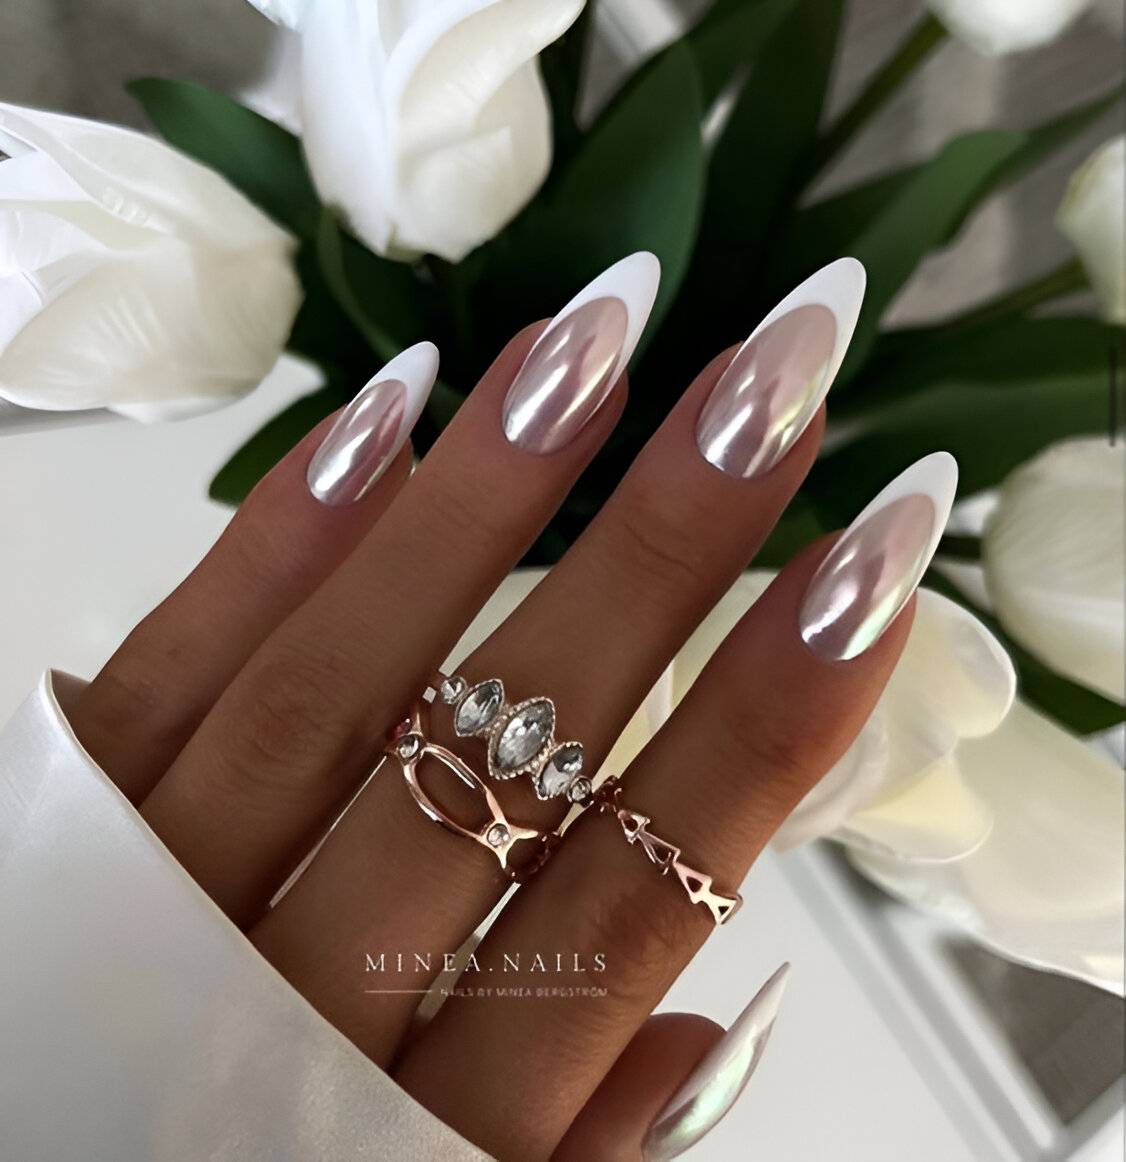 30 Chic Chrome Nail Designs For The Ultimate Glam Look - 205